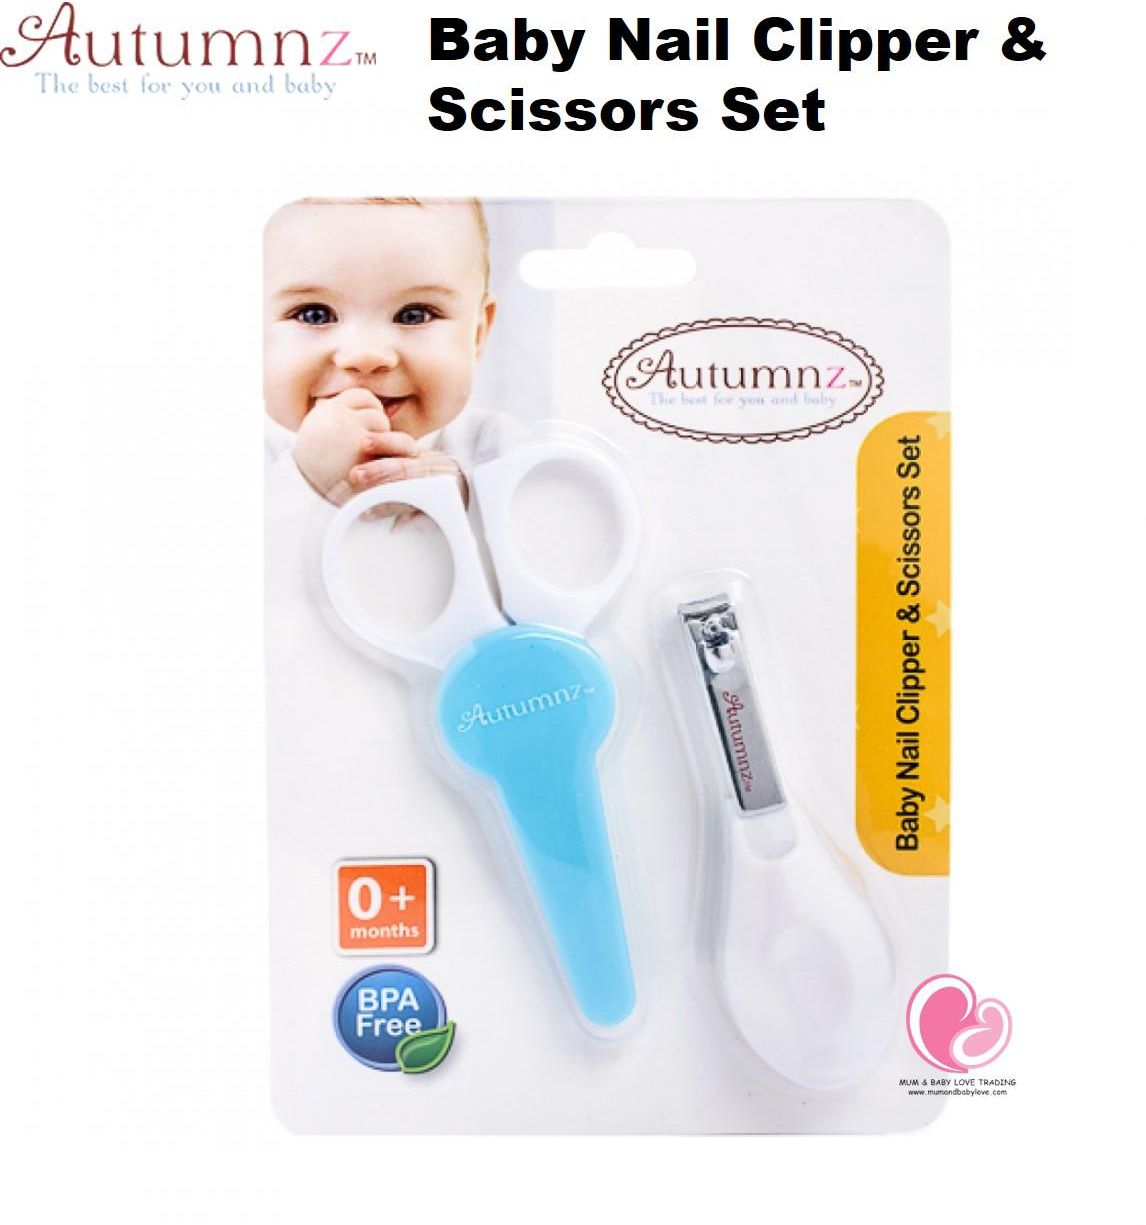 Autumnz Baby Nail Clipper / with Scissors Set (0 Months+) - 2 Options